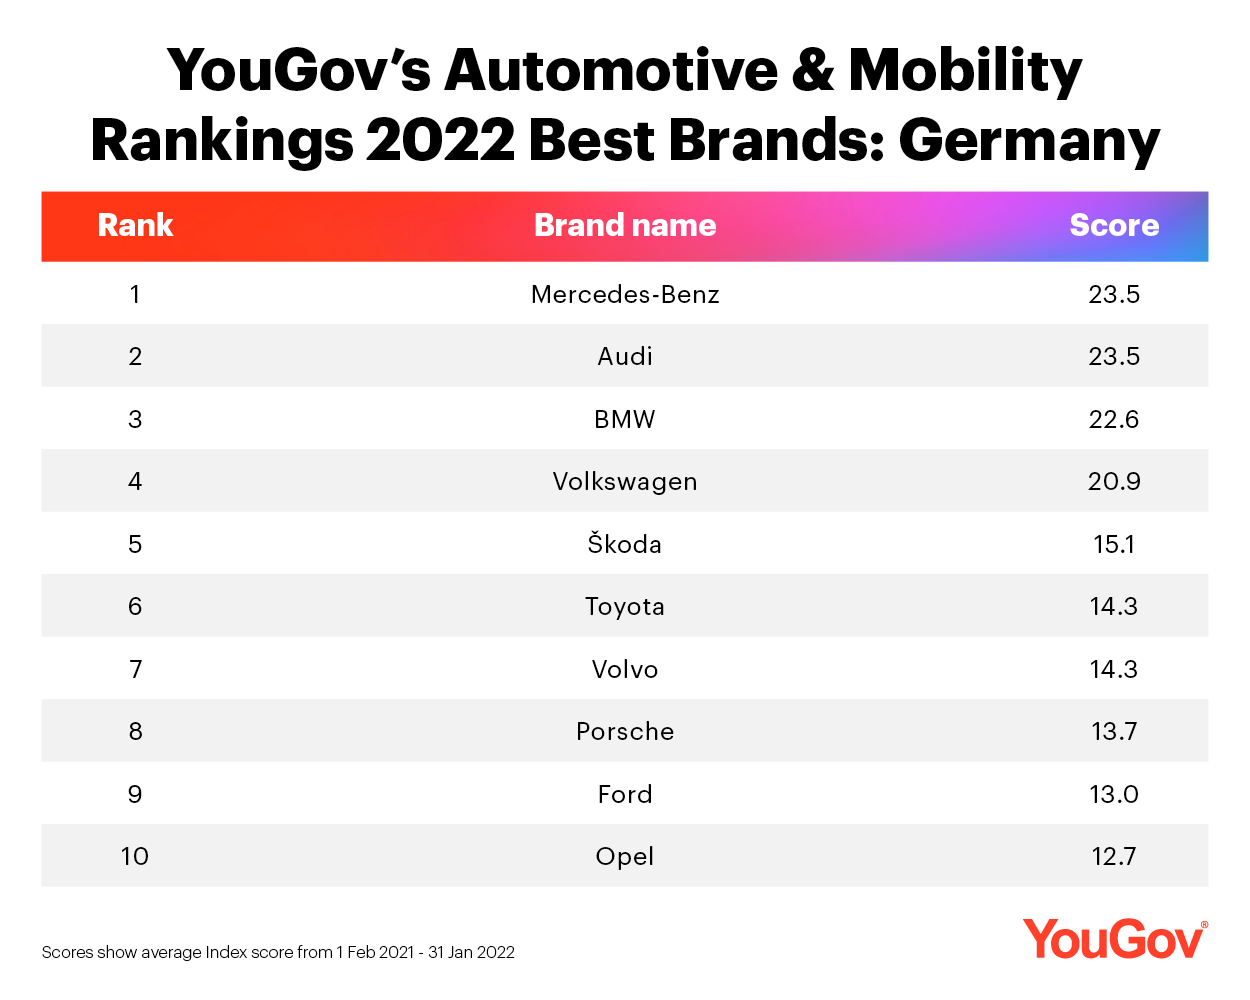 Automotive & Mobility Rankings 2022 Top 10 Germany